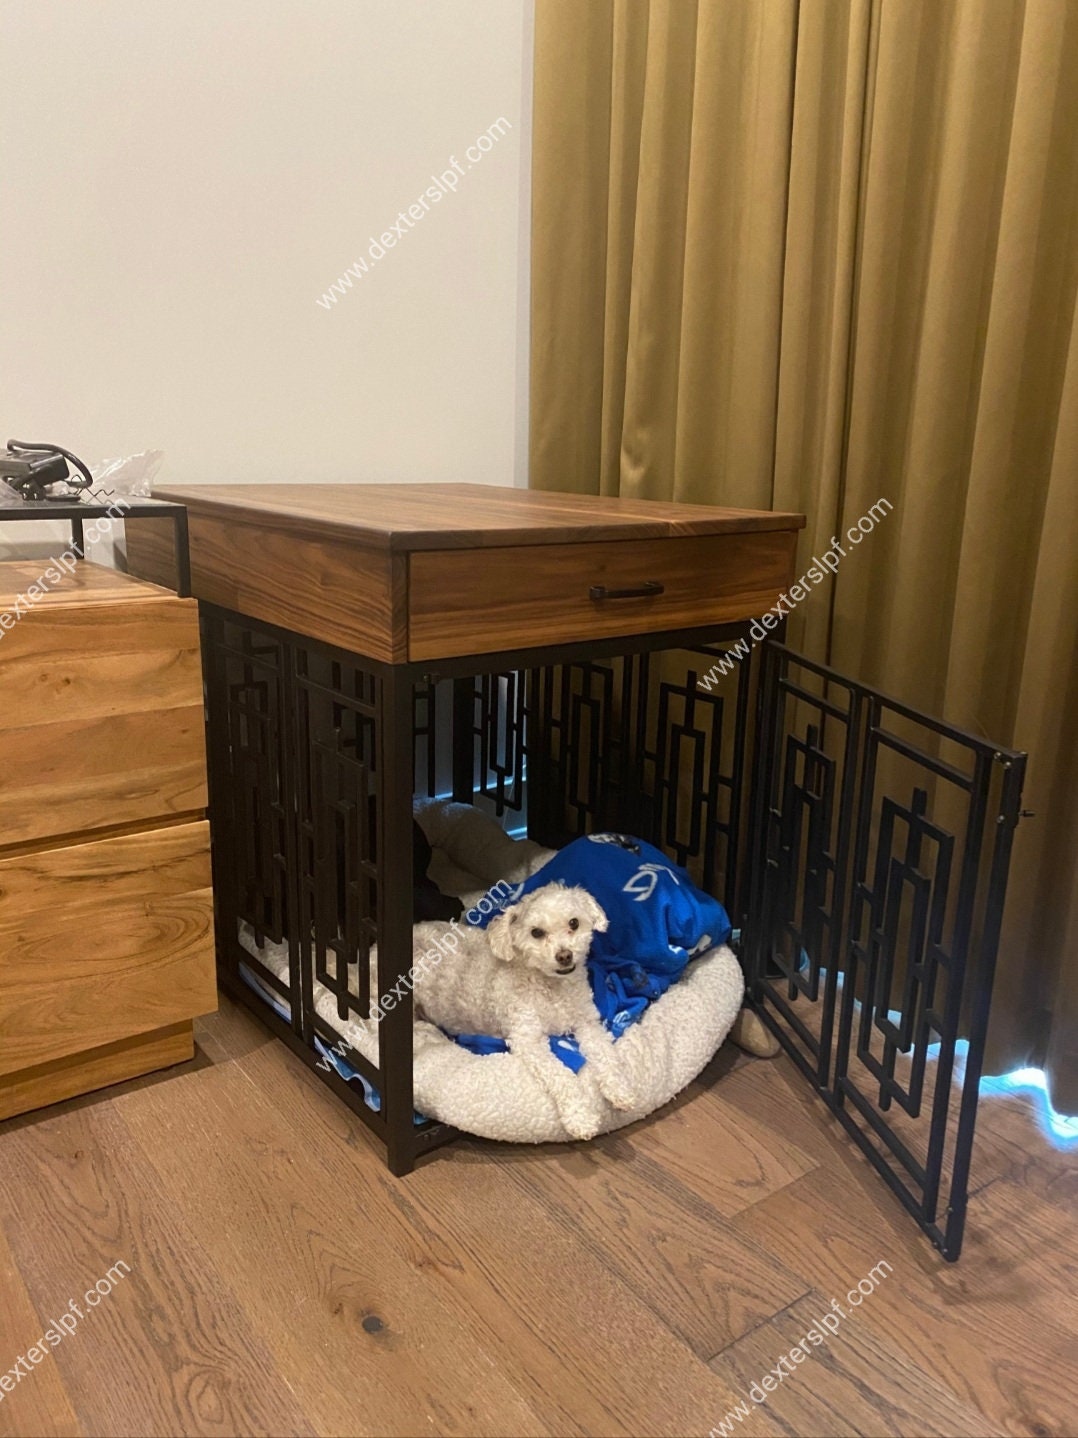 Daisy Large with Drawers Dog Crate Table, Modern Dog Crate, Dog Crate Furniture, Dog Kennel Furniture, Dog Crate End Table